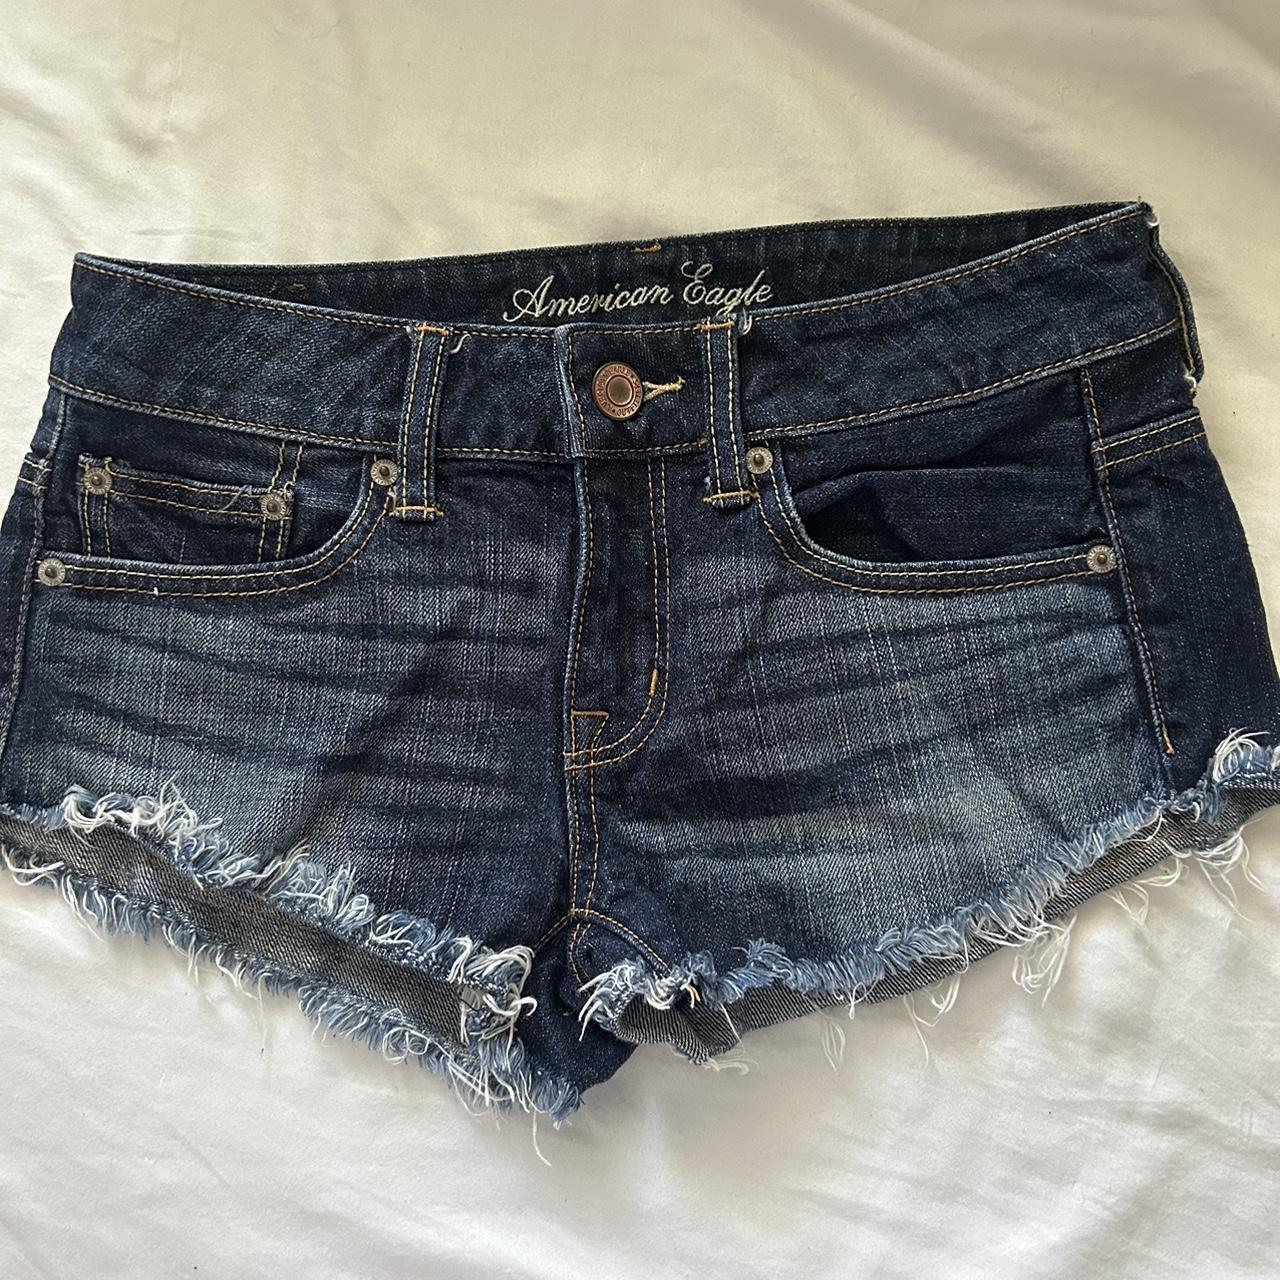 American Eagle Women's Navy and Blue Shorts | Depop